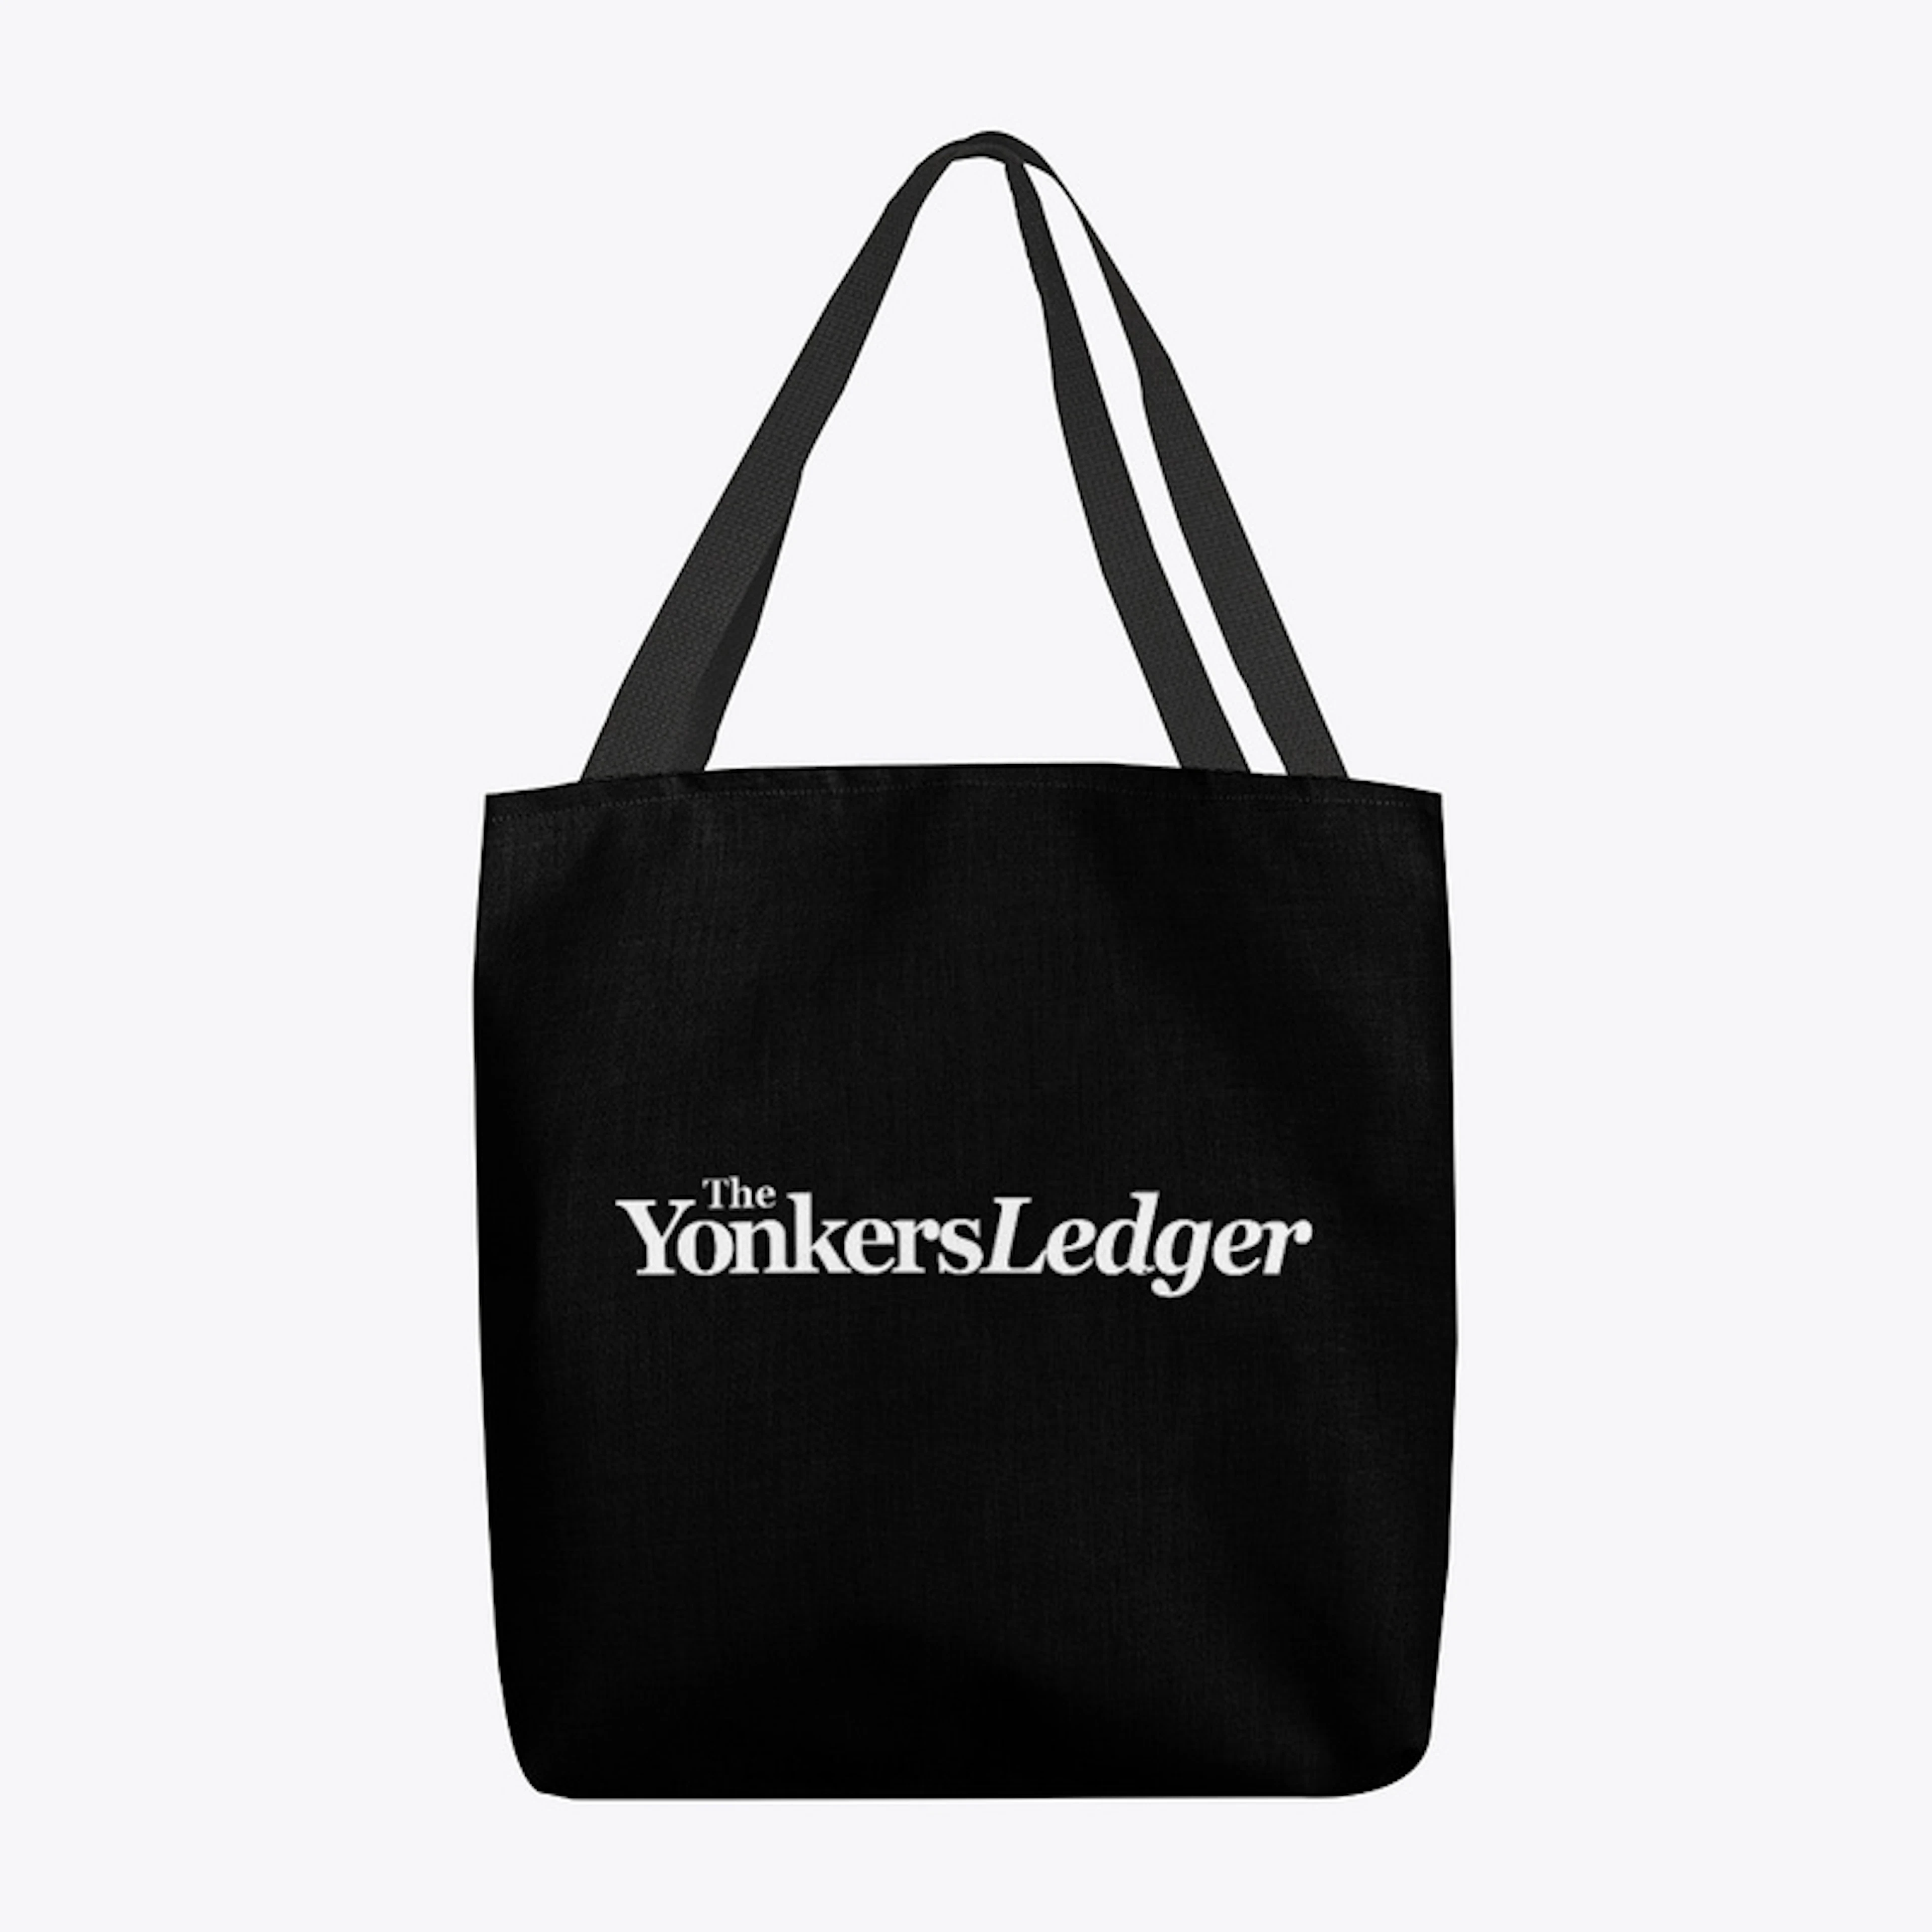 The Yonkers Ledger Tote Bag